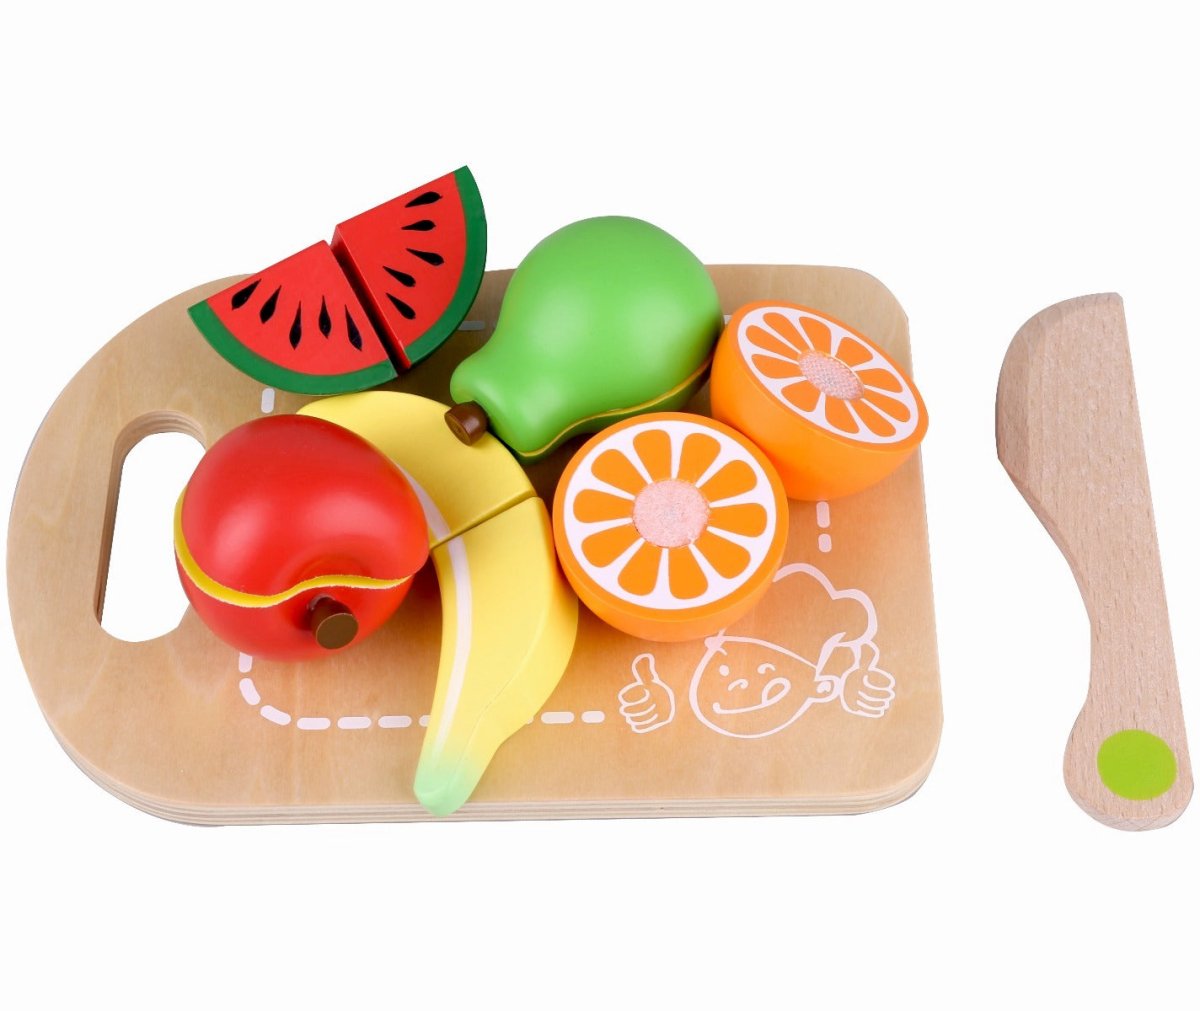 Pretend Cutting Fruit Non-Toxic Wooden Food Set for Imaginative Play